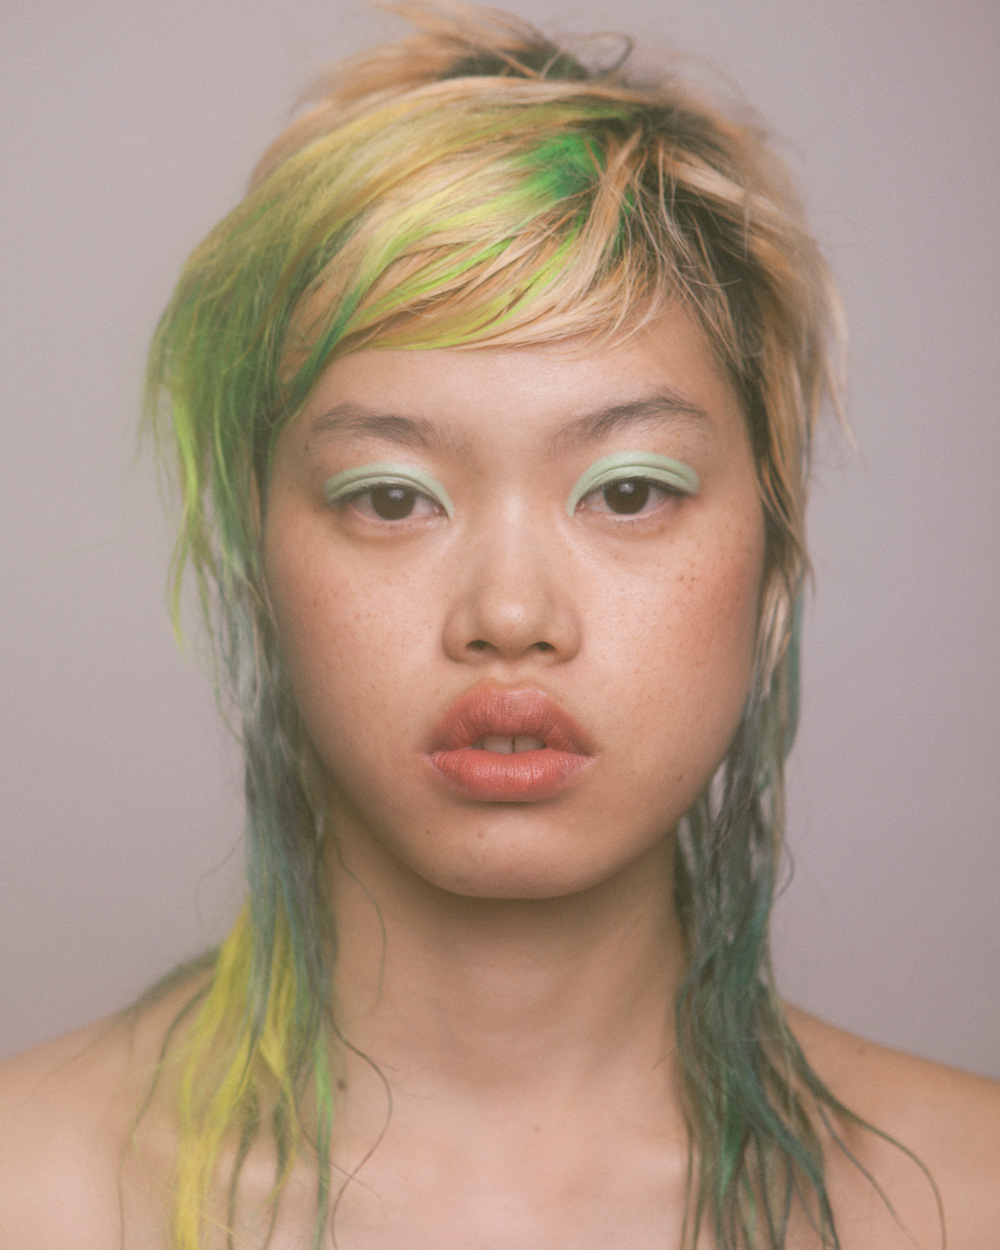 phoebe walters makes a colorful mark on the face of beauty